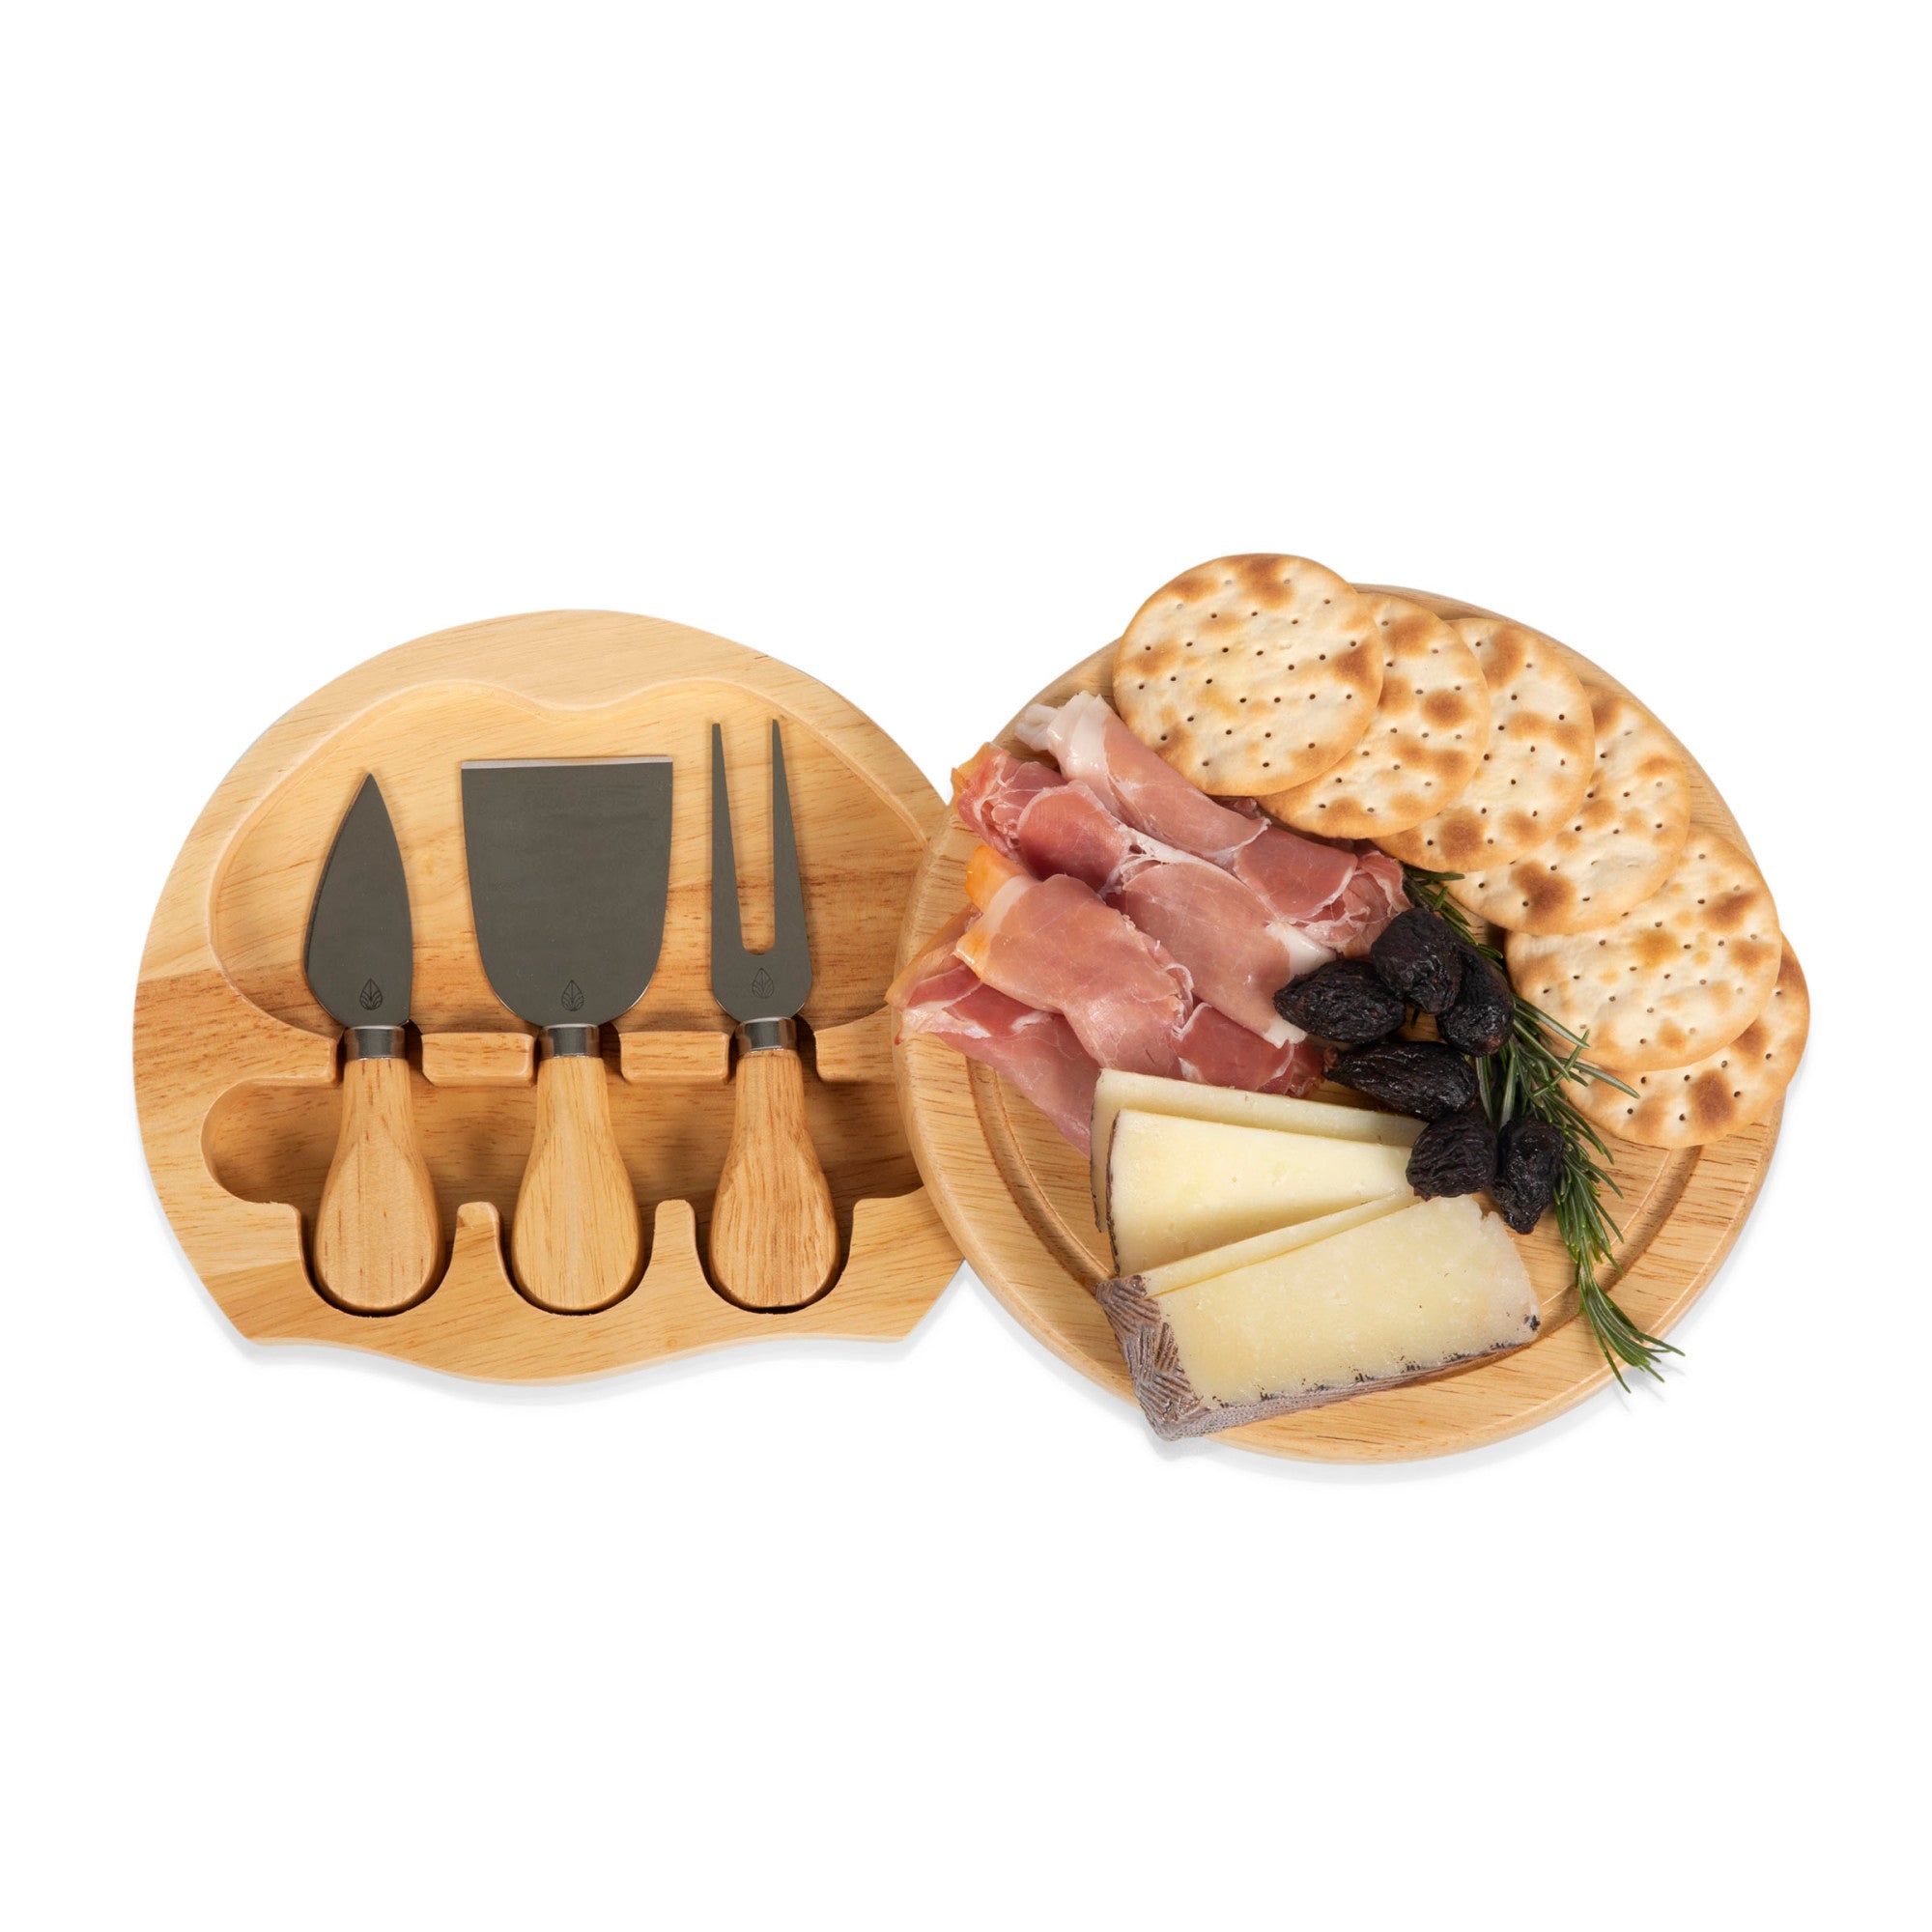 New York Yankees - Brie Cheese Cutting Board & Tools Set